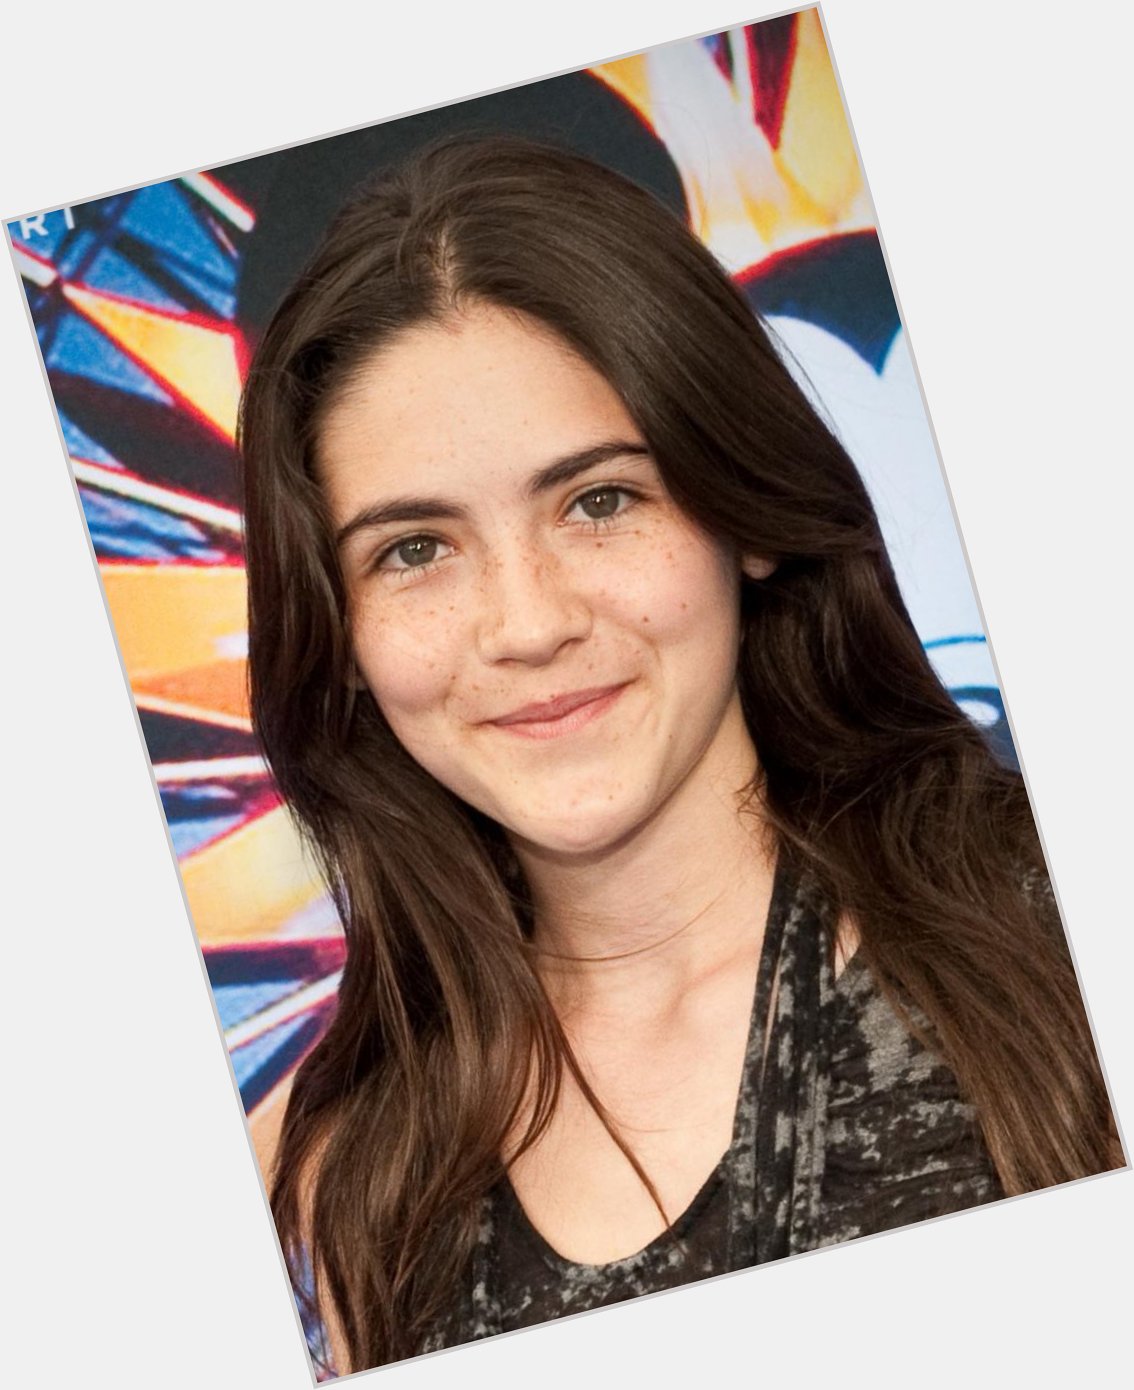 Happy birthday to Isabelle Fuhrman! She turns 17 today. 